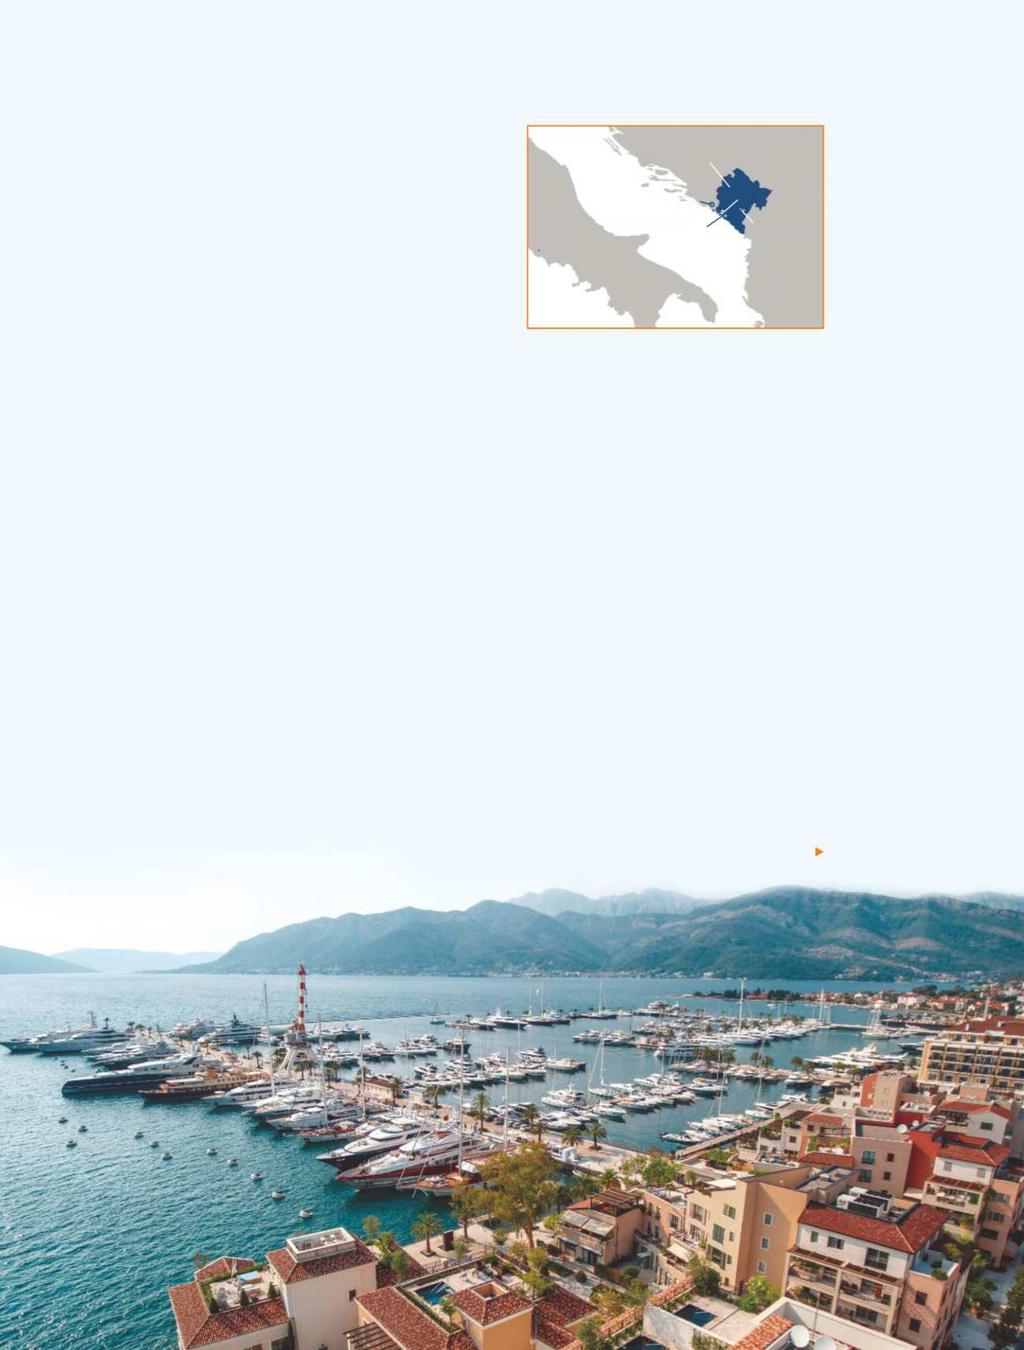 PORTO MONTENEGRO IS IN THE UNESCO PROTECTED BOCA BAY AND HAS THE COUNTRY S MOST DEVELOPED BOATING FACILITIES THINKING BIG The facilities for superyachts have existed here since the development of